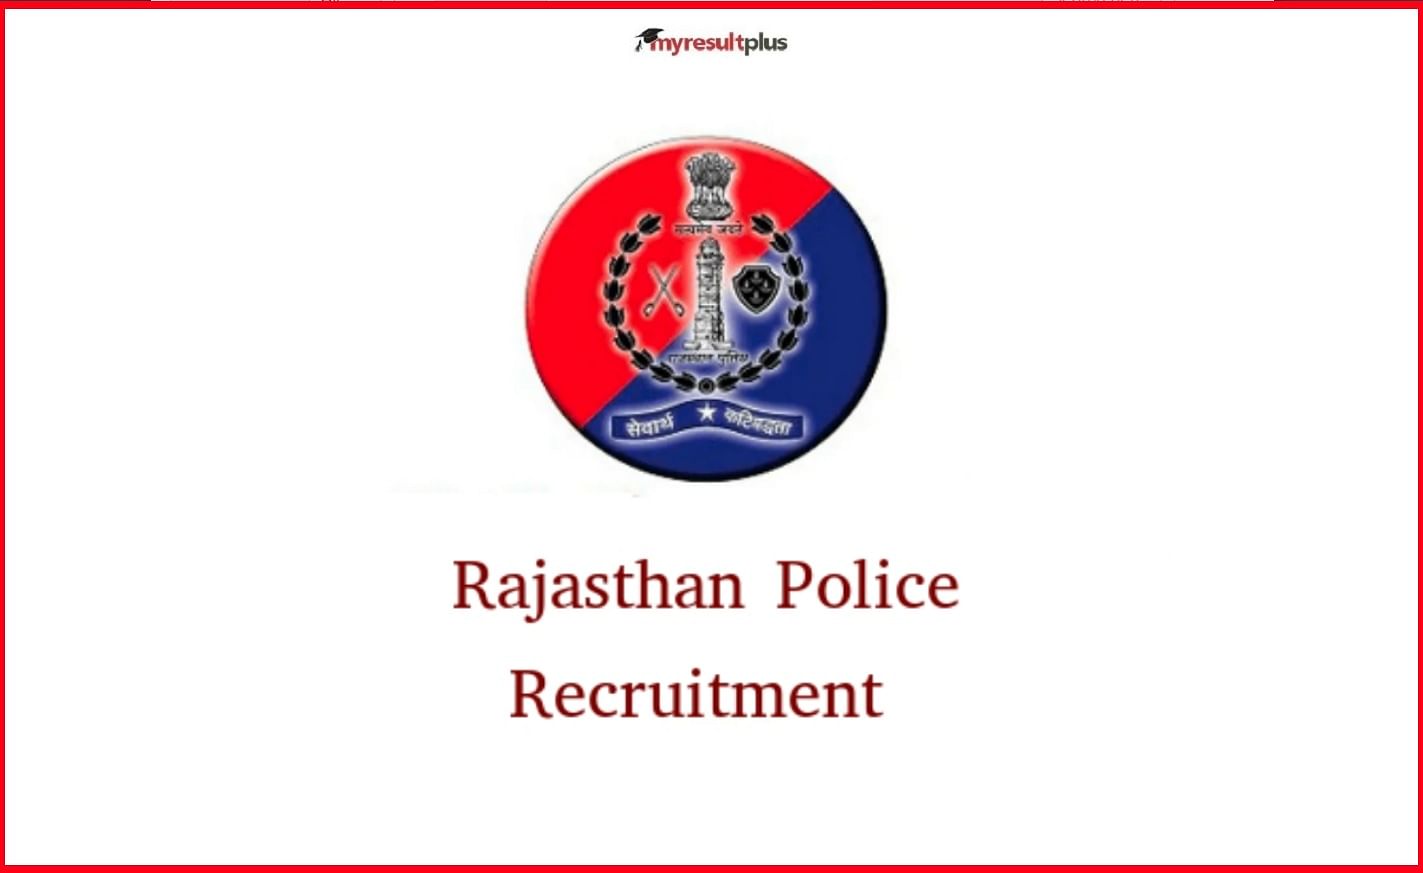 Rajasthan Police Constable Recruitment 2021 Notification for 4588 Posts OUT, Application Begins on November 10